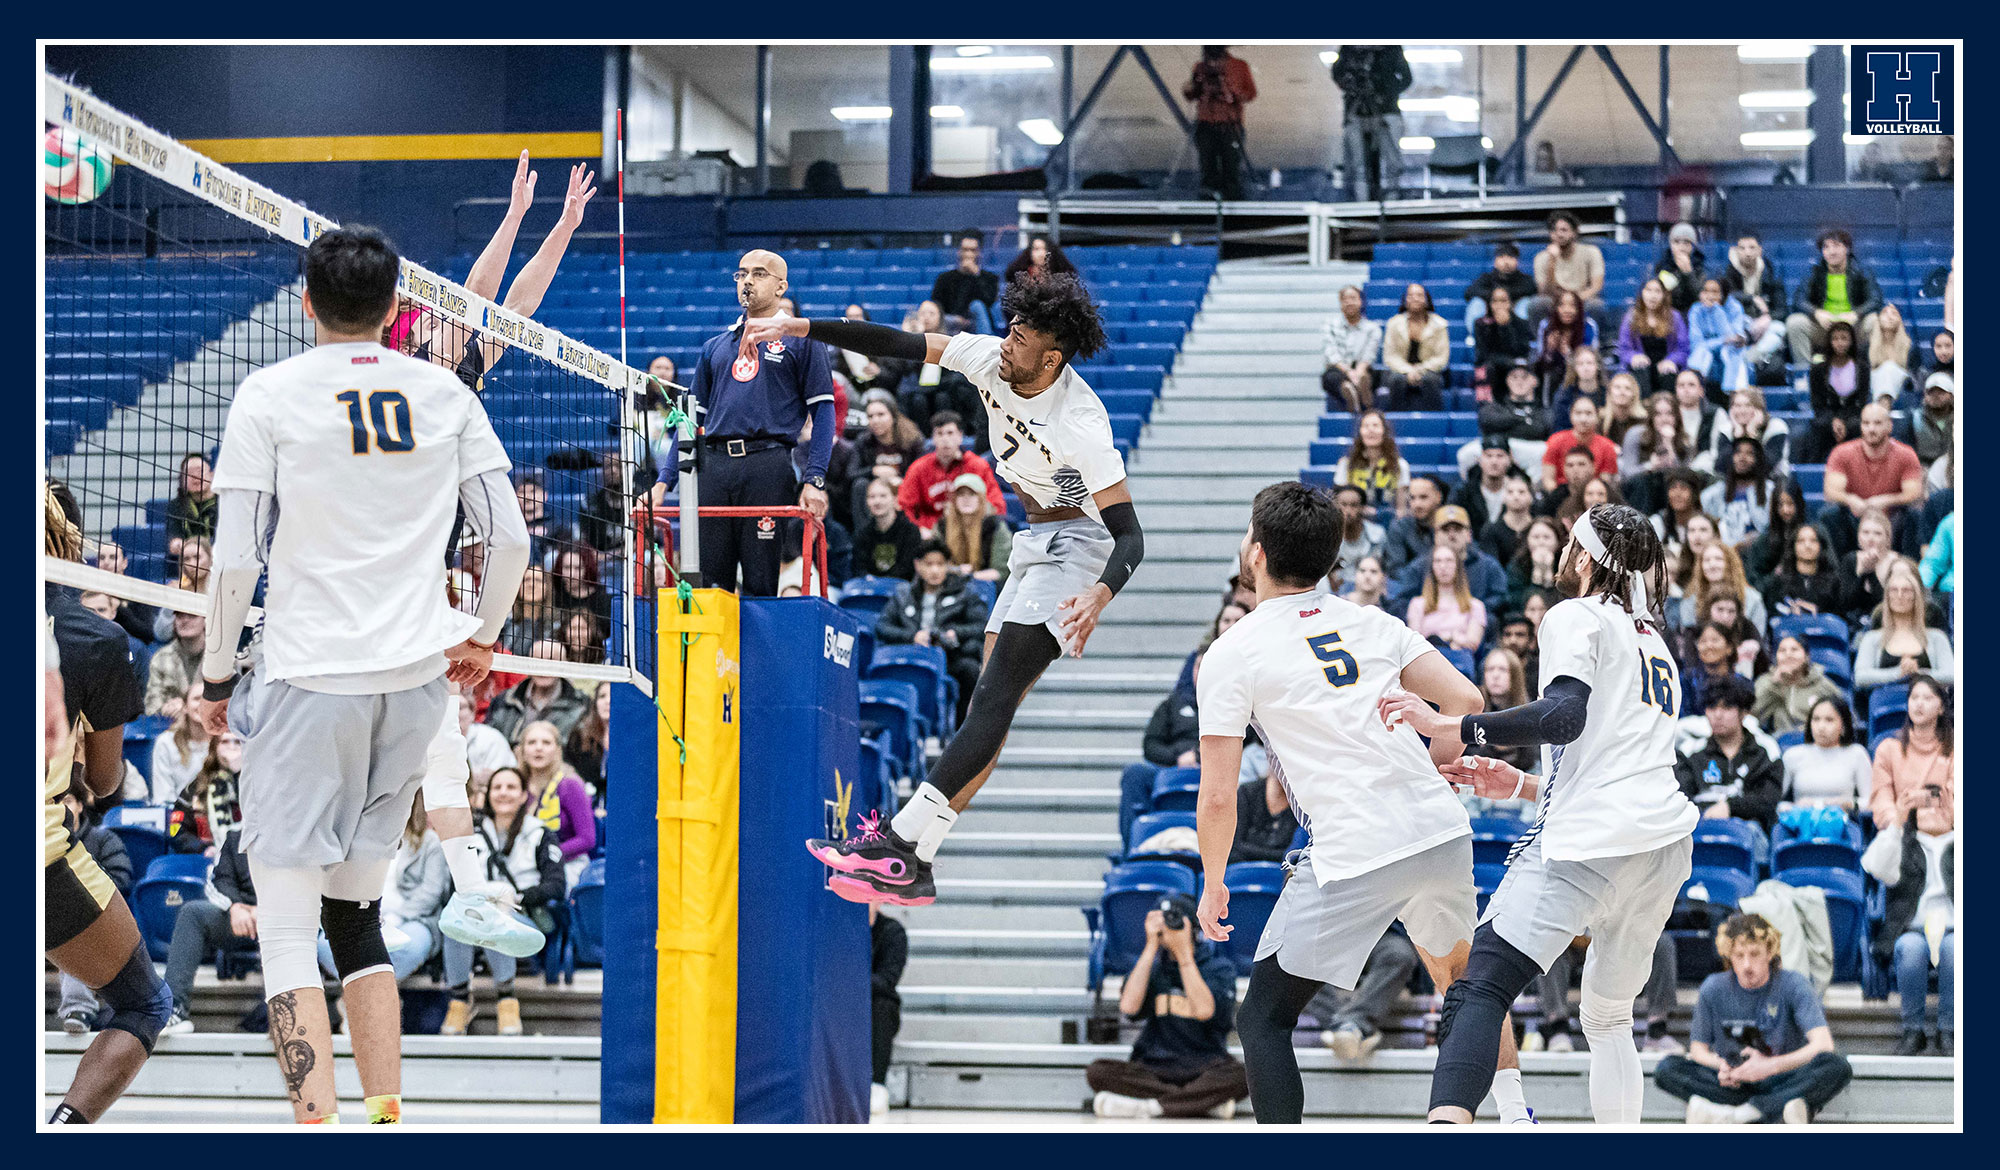 Men's Volleyball sweeps No. 5 Conestoga to earn final four berth